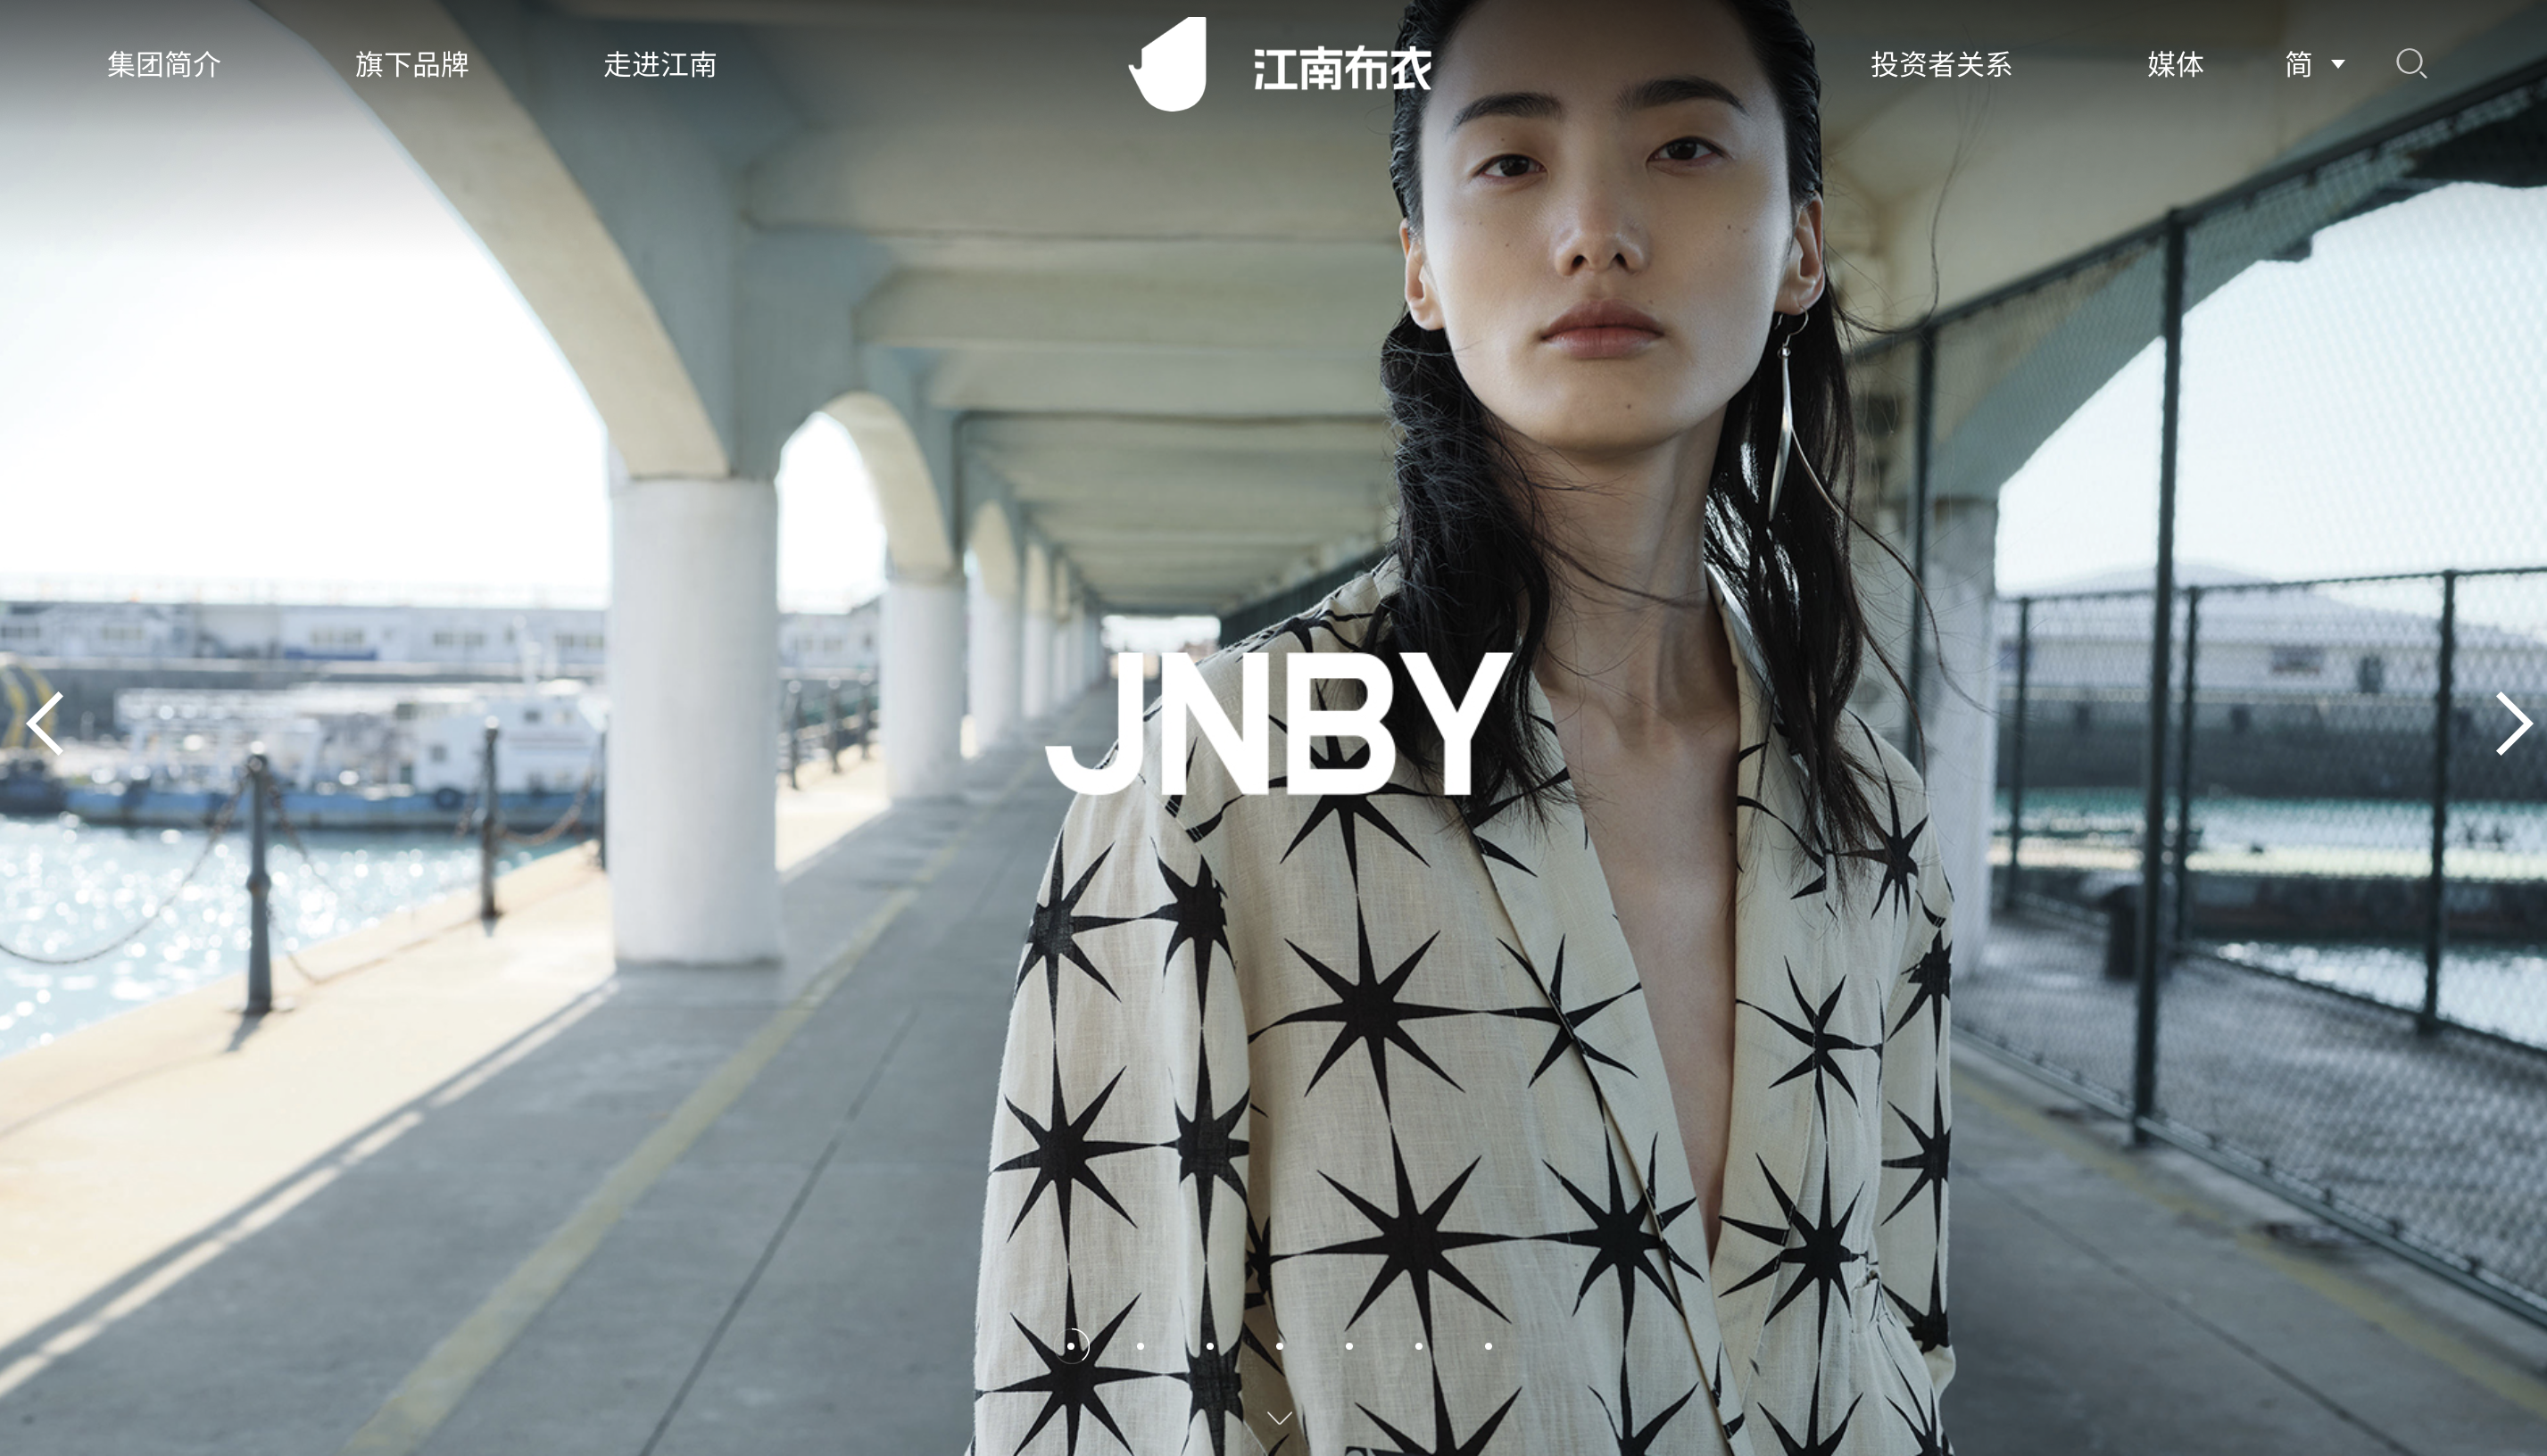 Latest Financial Report of JNBY: Members Who Spent Over 5,000 Yuan Annually Contributed More Than Half of Offline Retail Sales